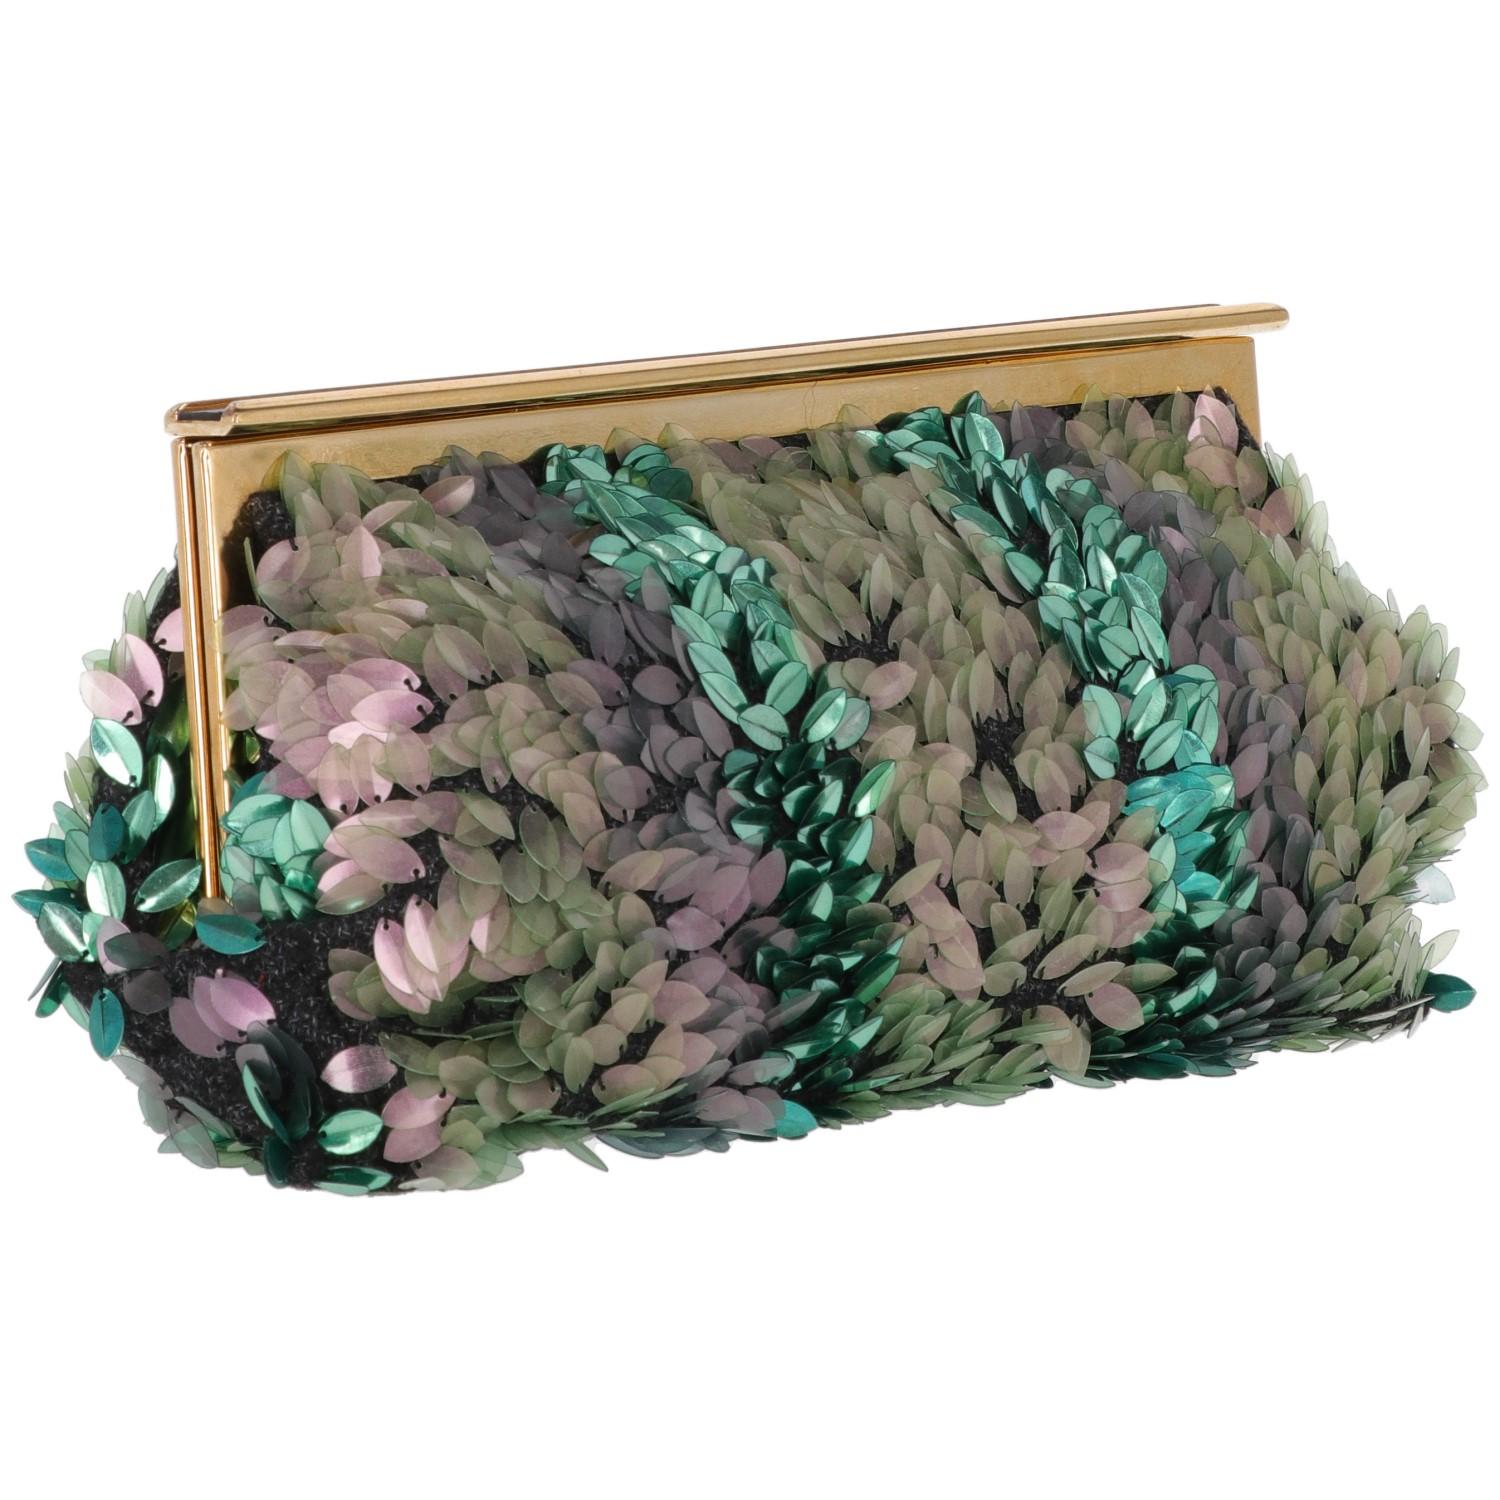 Marni black fabric clutch bag covered with lilac and green leaf-shaped sequins. Golden metal and black leather insert snap closure. Beige cotton interior with brown leather inserts and two patch pockets.

Width: 30 cm
Hight: 20 cm
Depth: 6